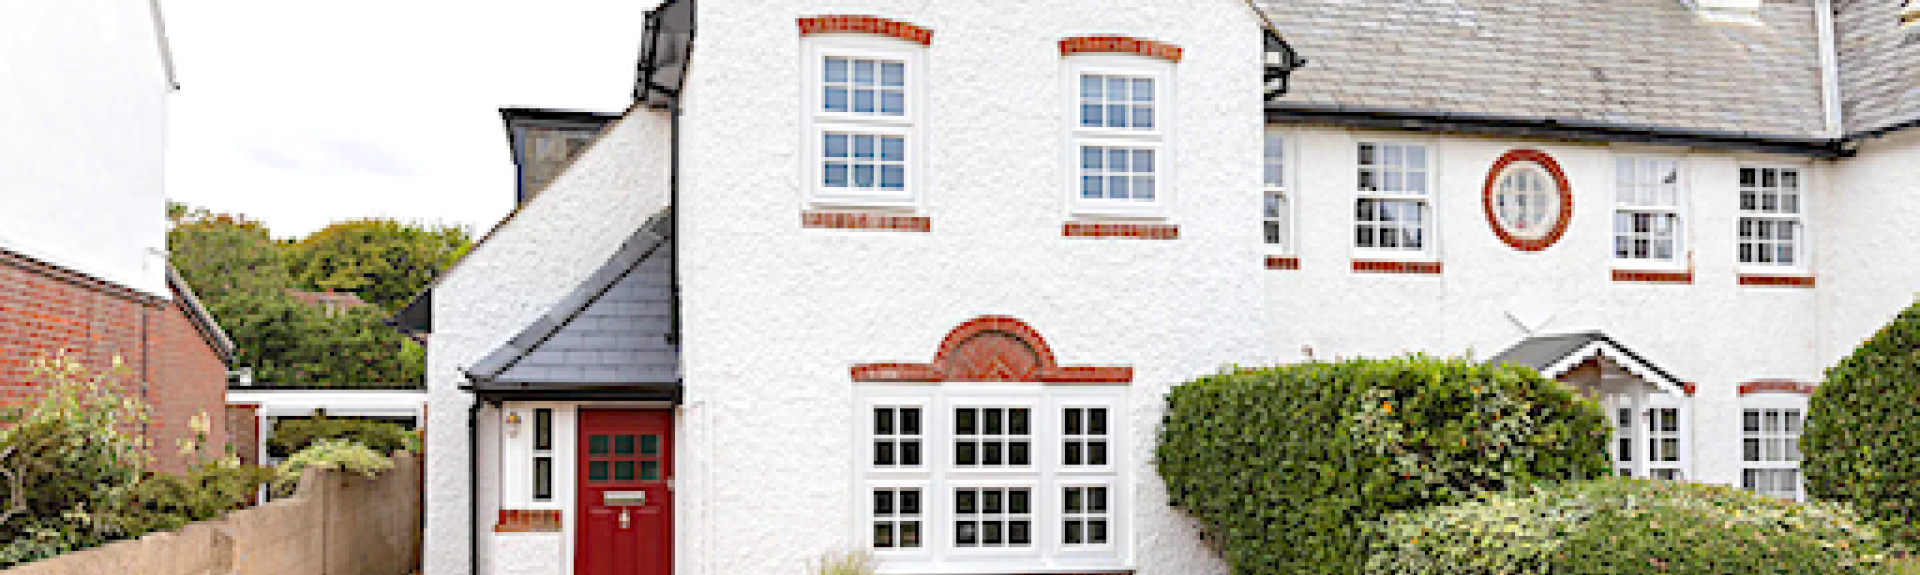 2-storey1930s holiday cottage in Lymington